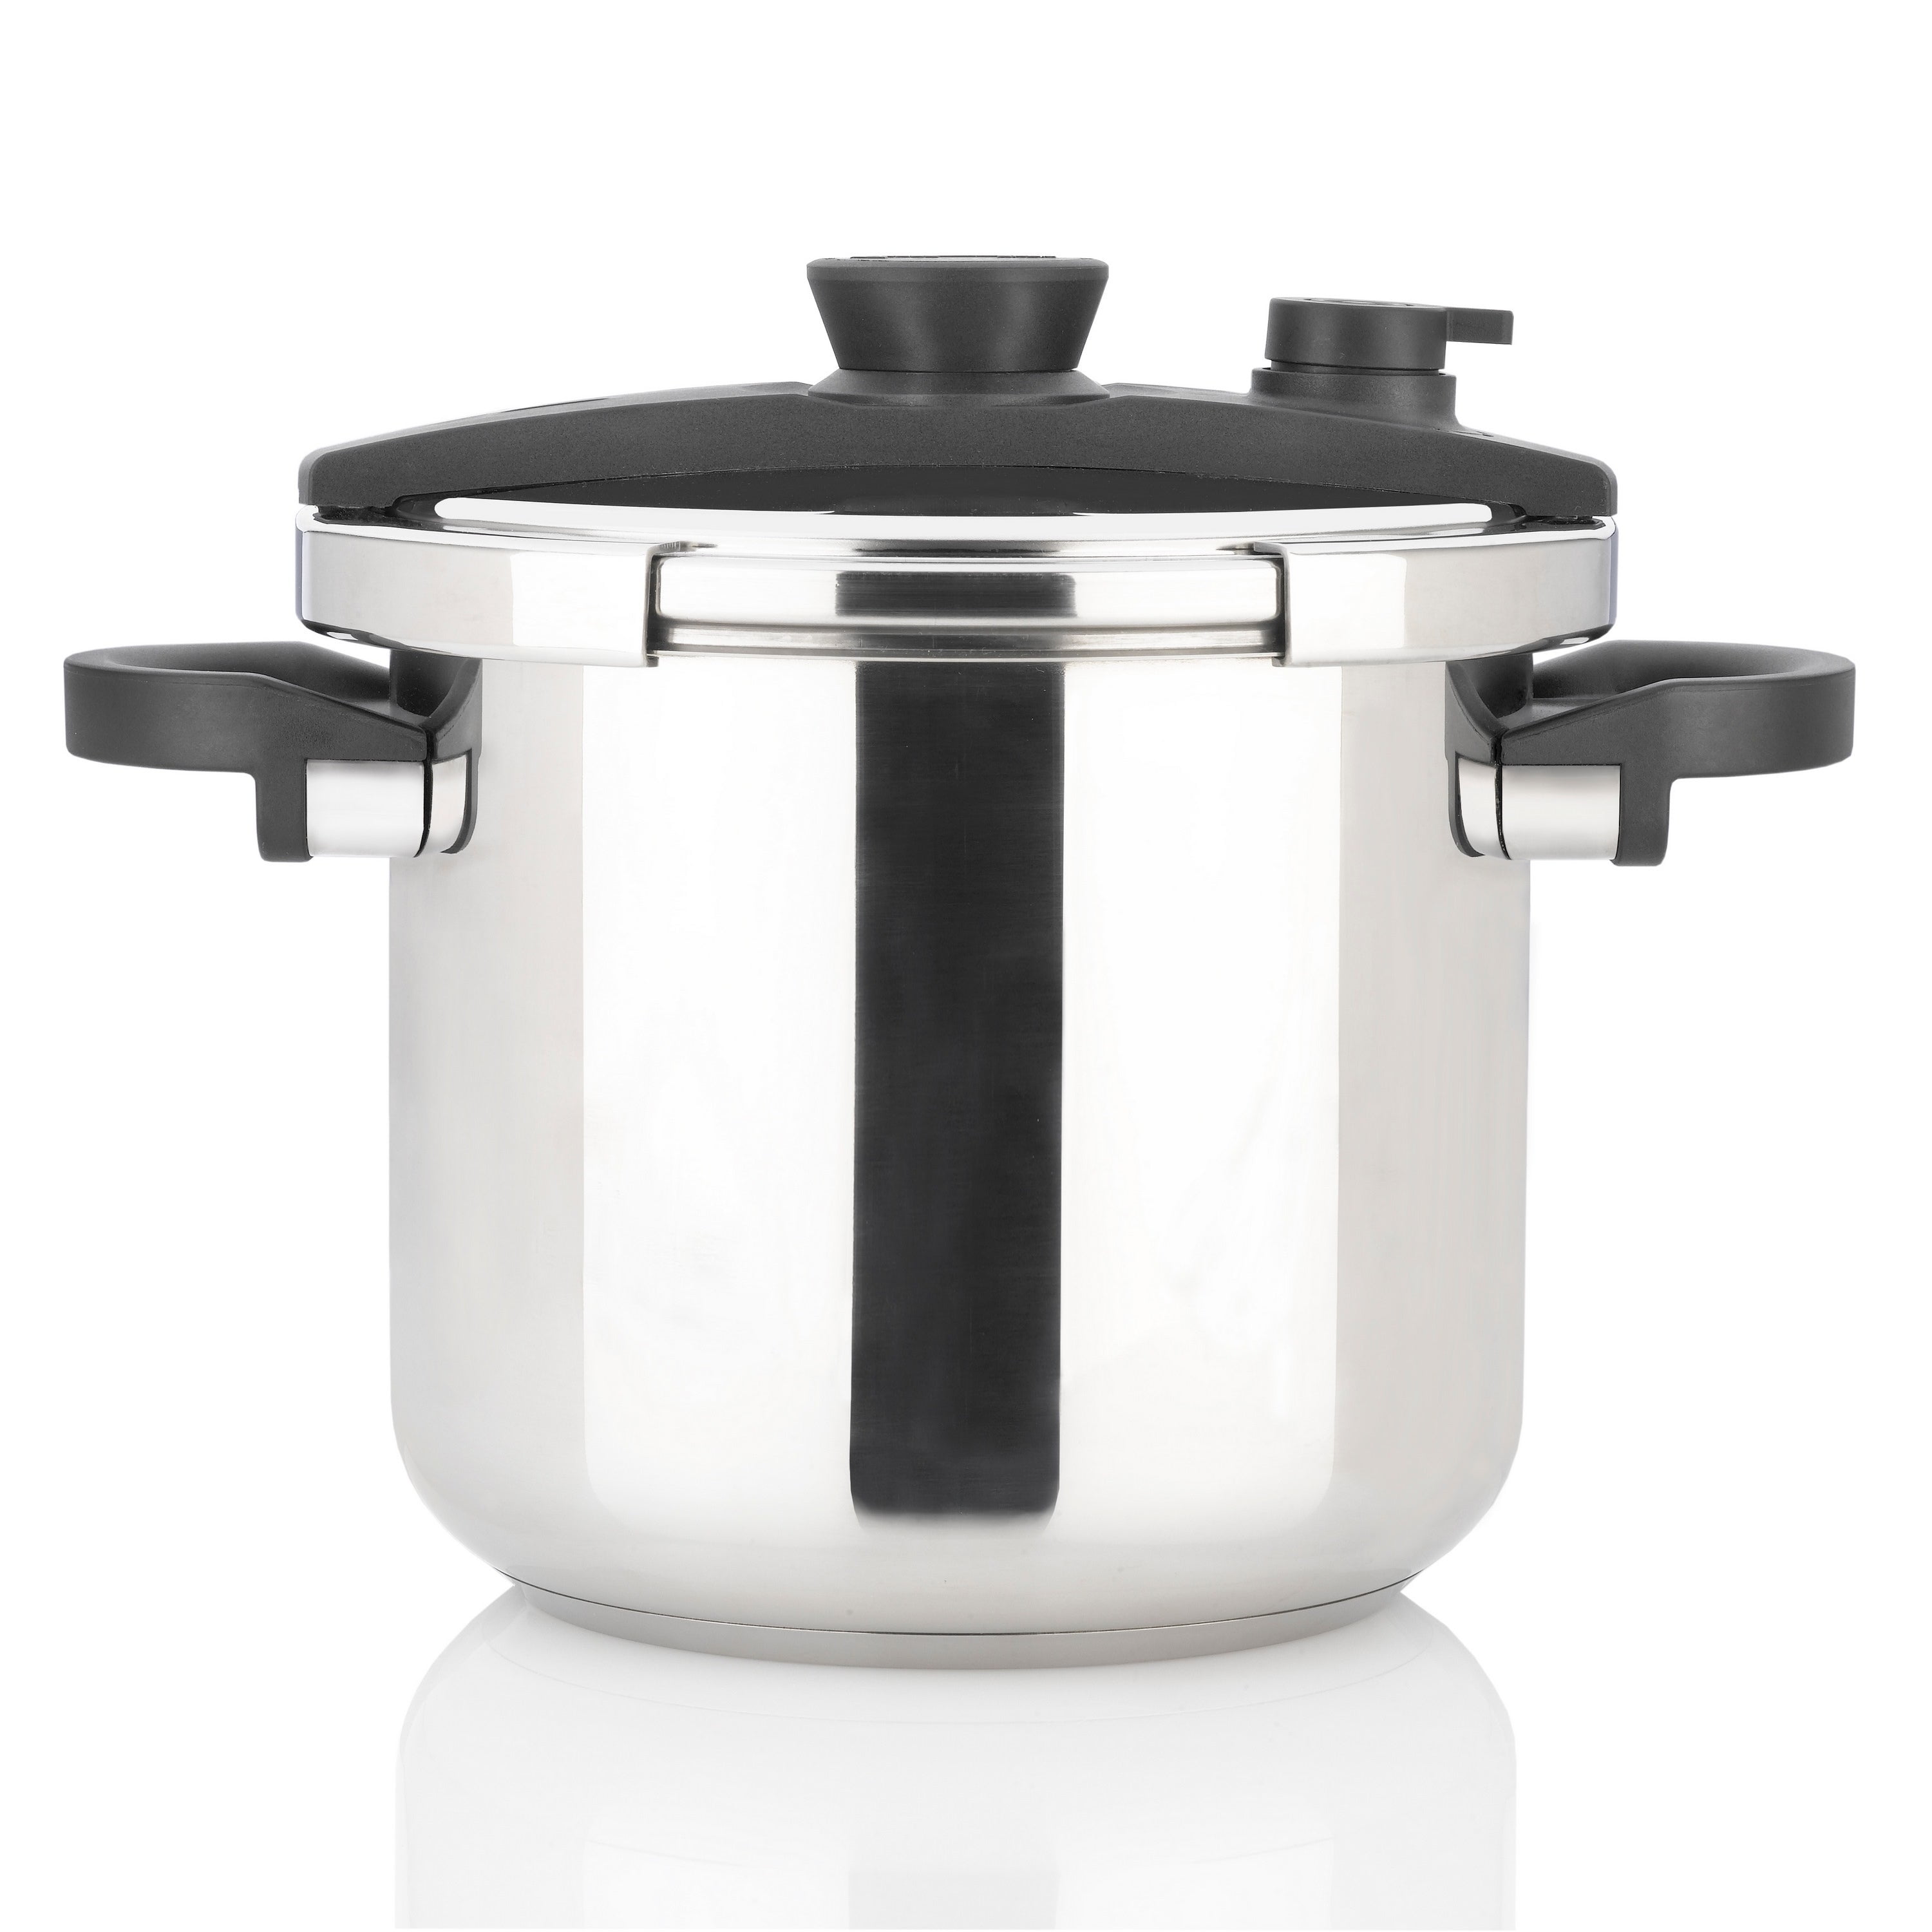 CAREY DPC-9SS Smart Electric Pressure Cooker and Canner, Stainless